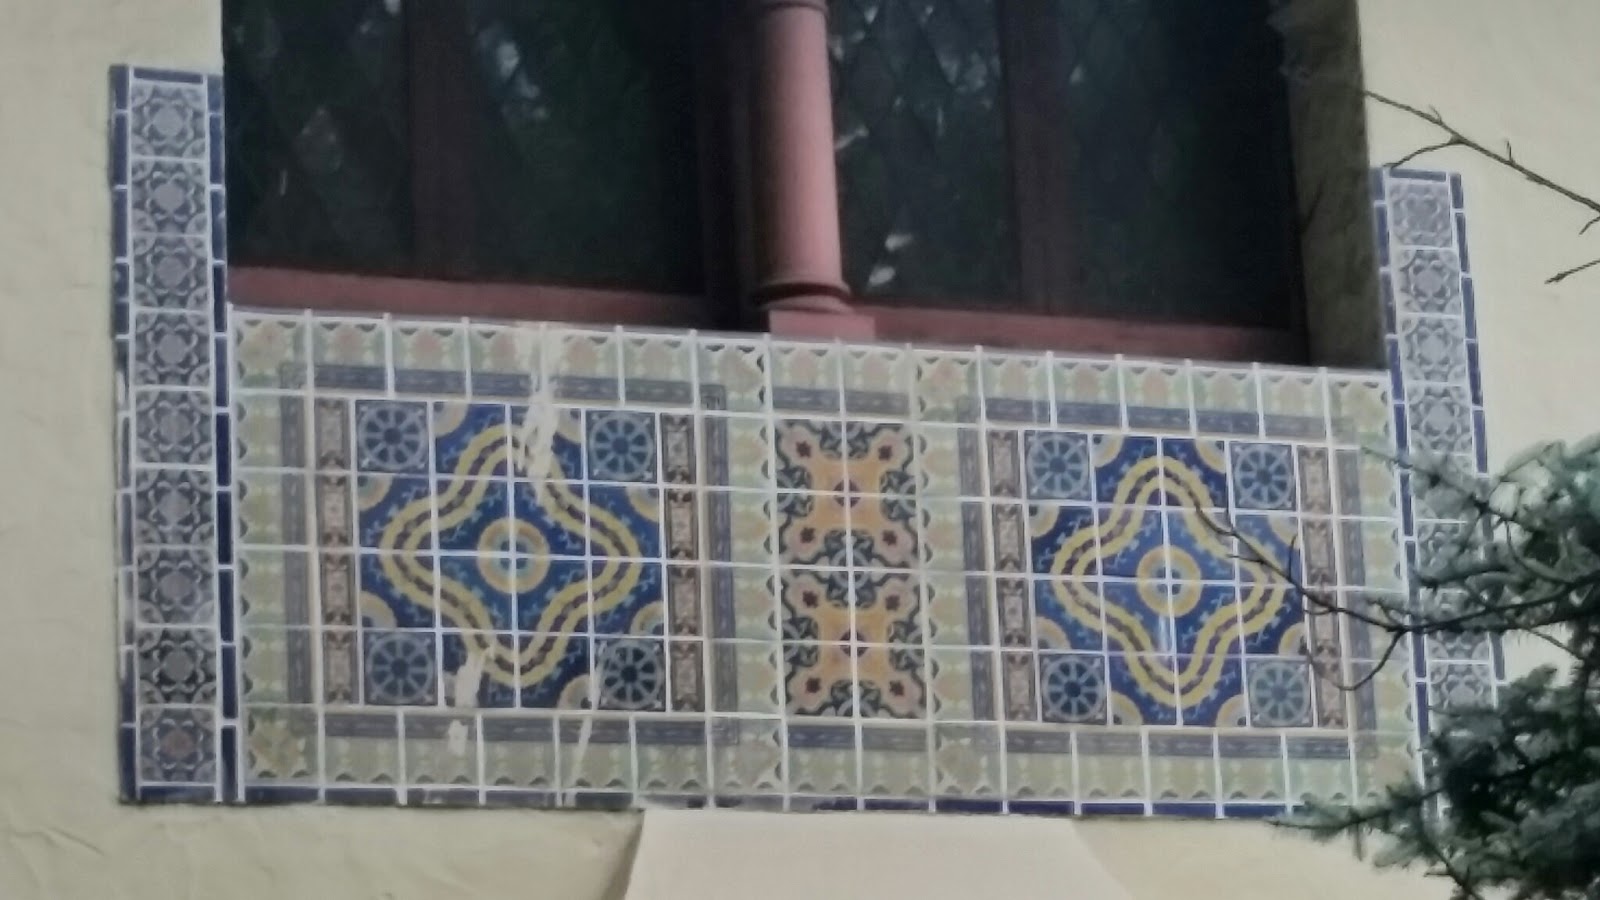 A Moorish-influenced California tile detail from the early 1920's